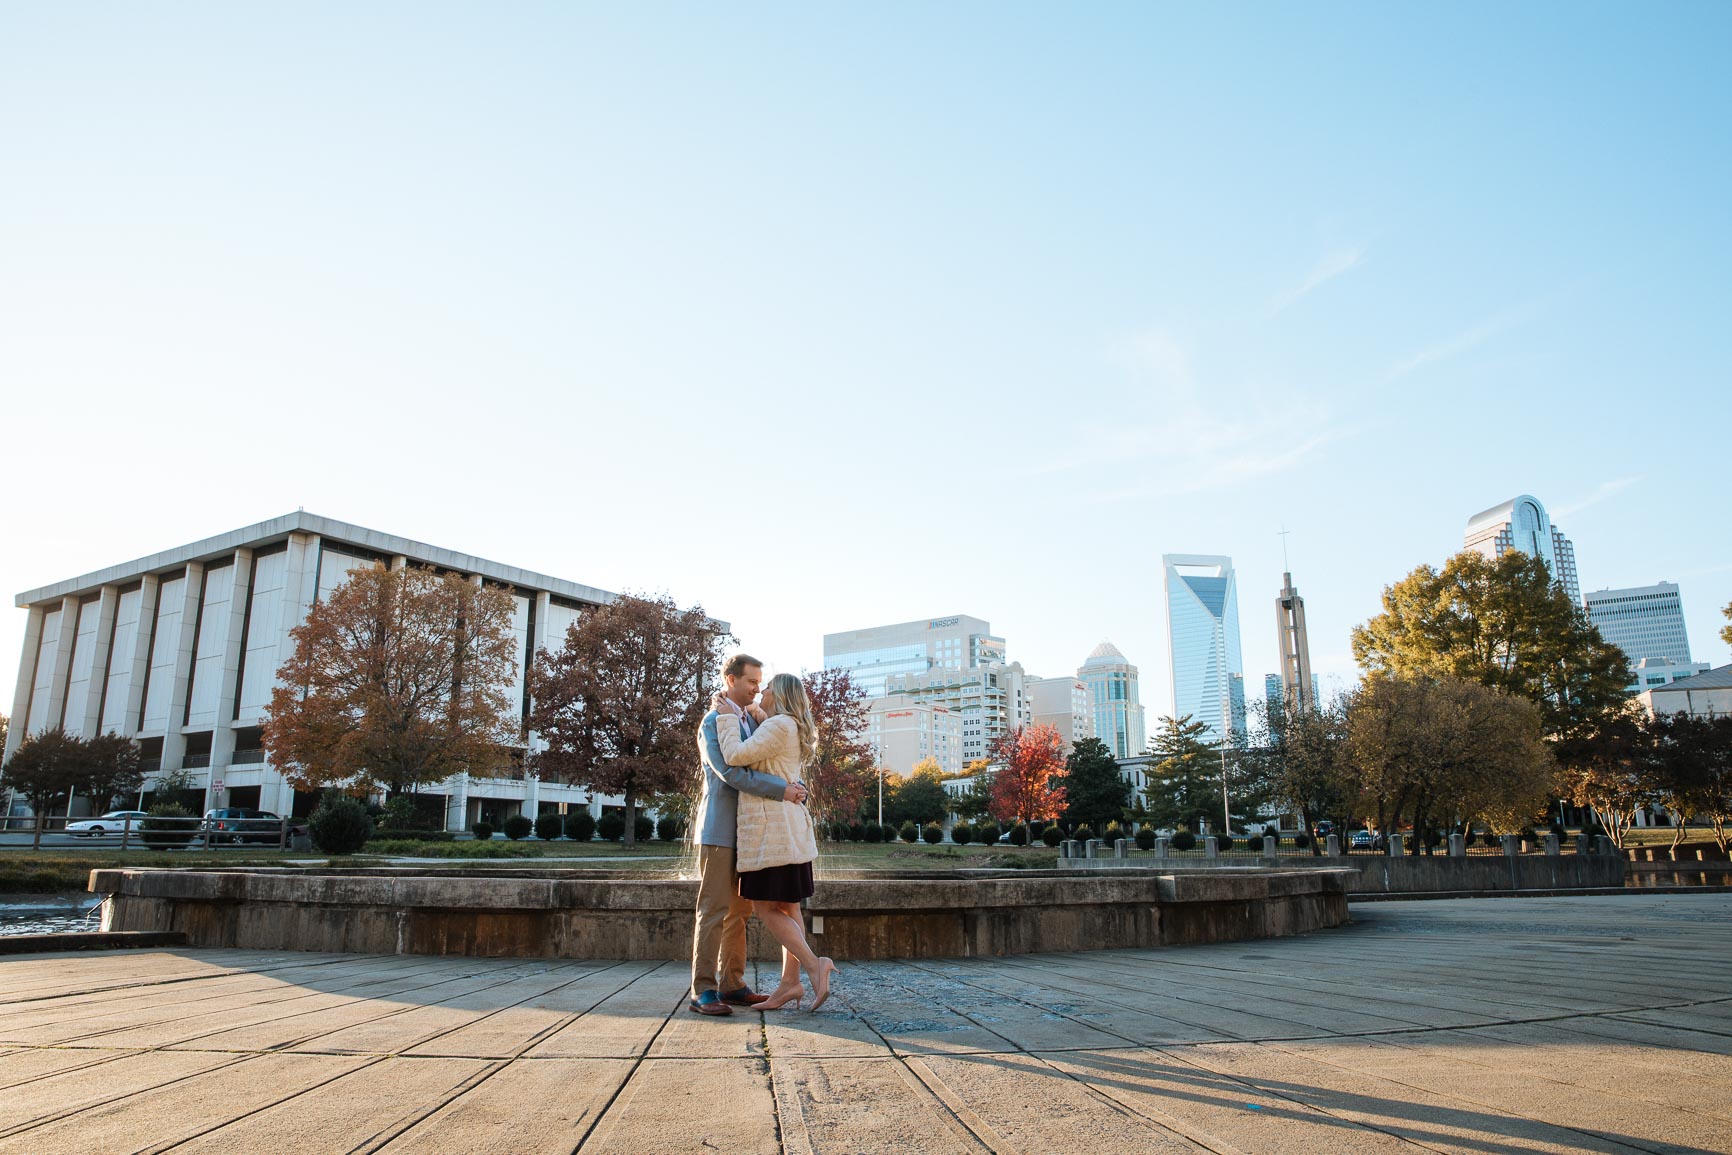 Uptown Charlotte engagement session at Marshall Park by nhieu tang photography | nhieutang.com